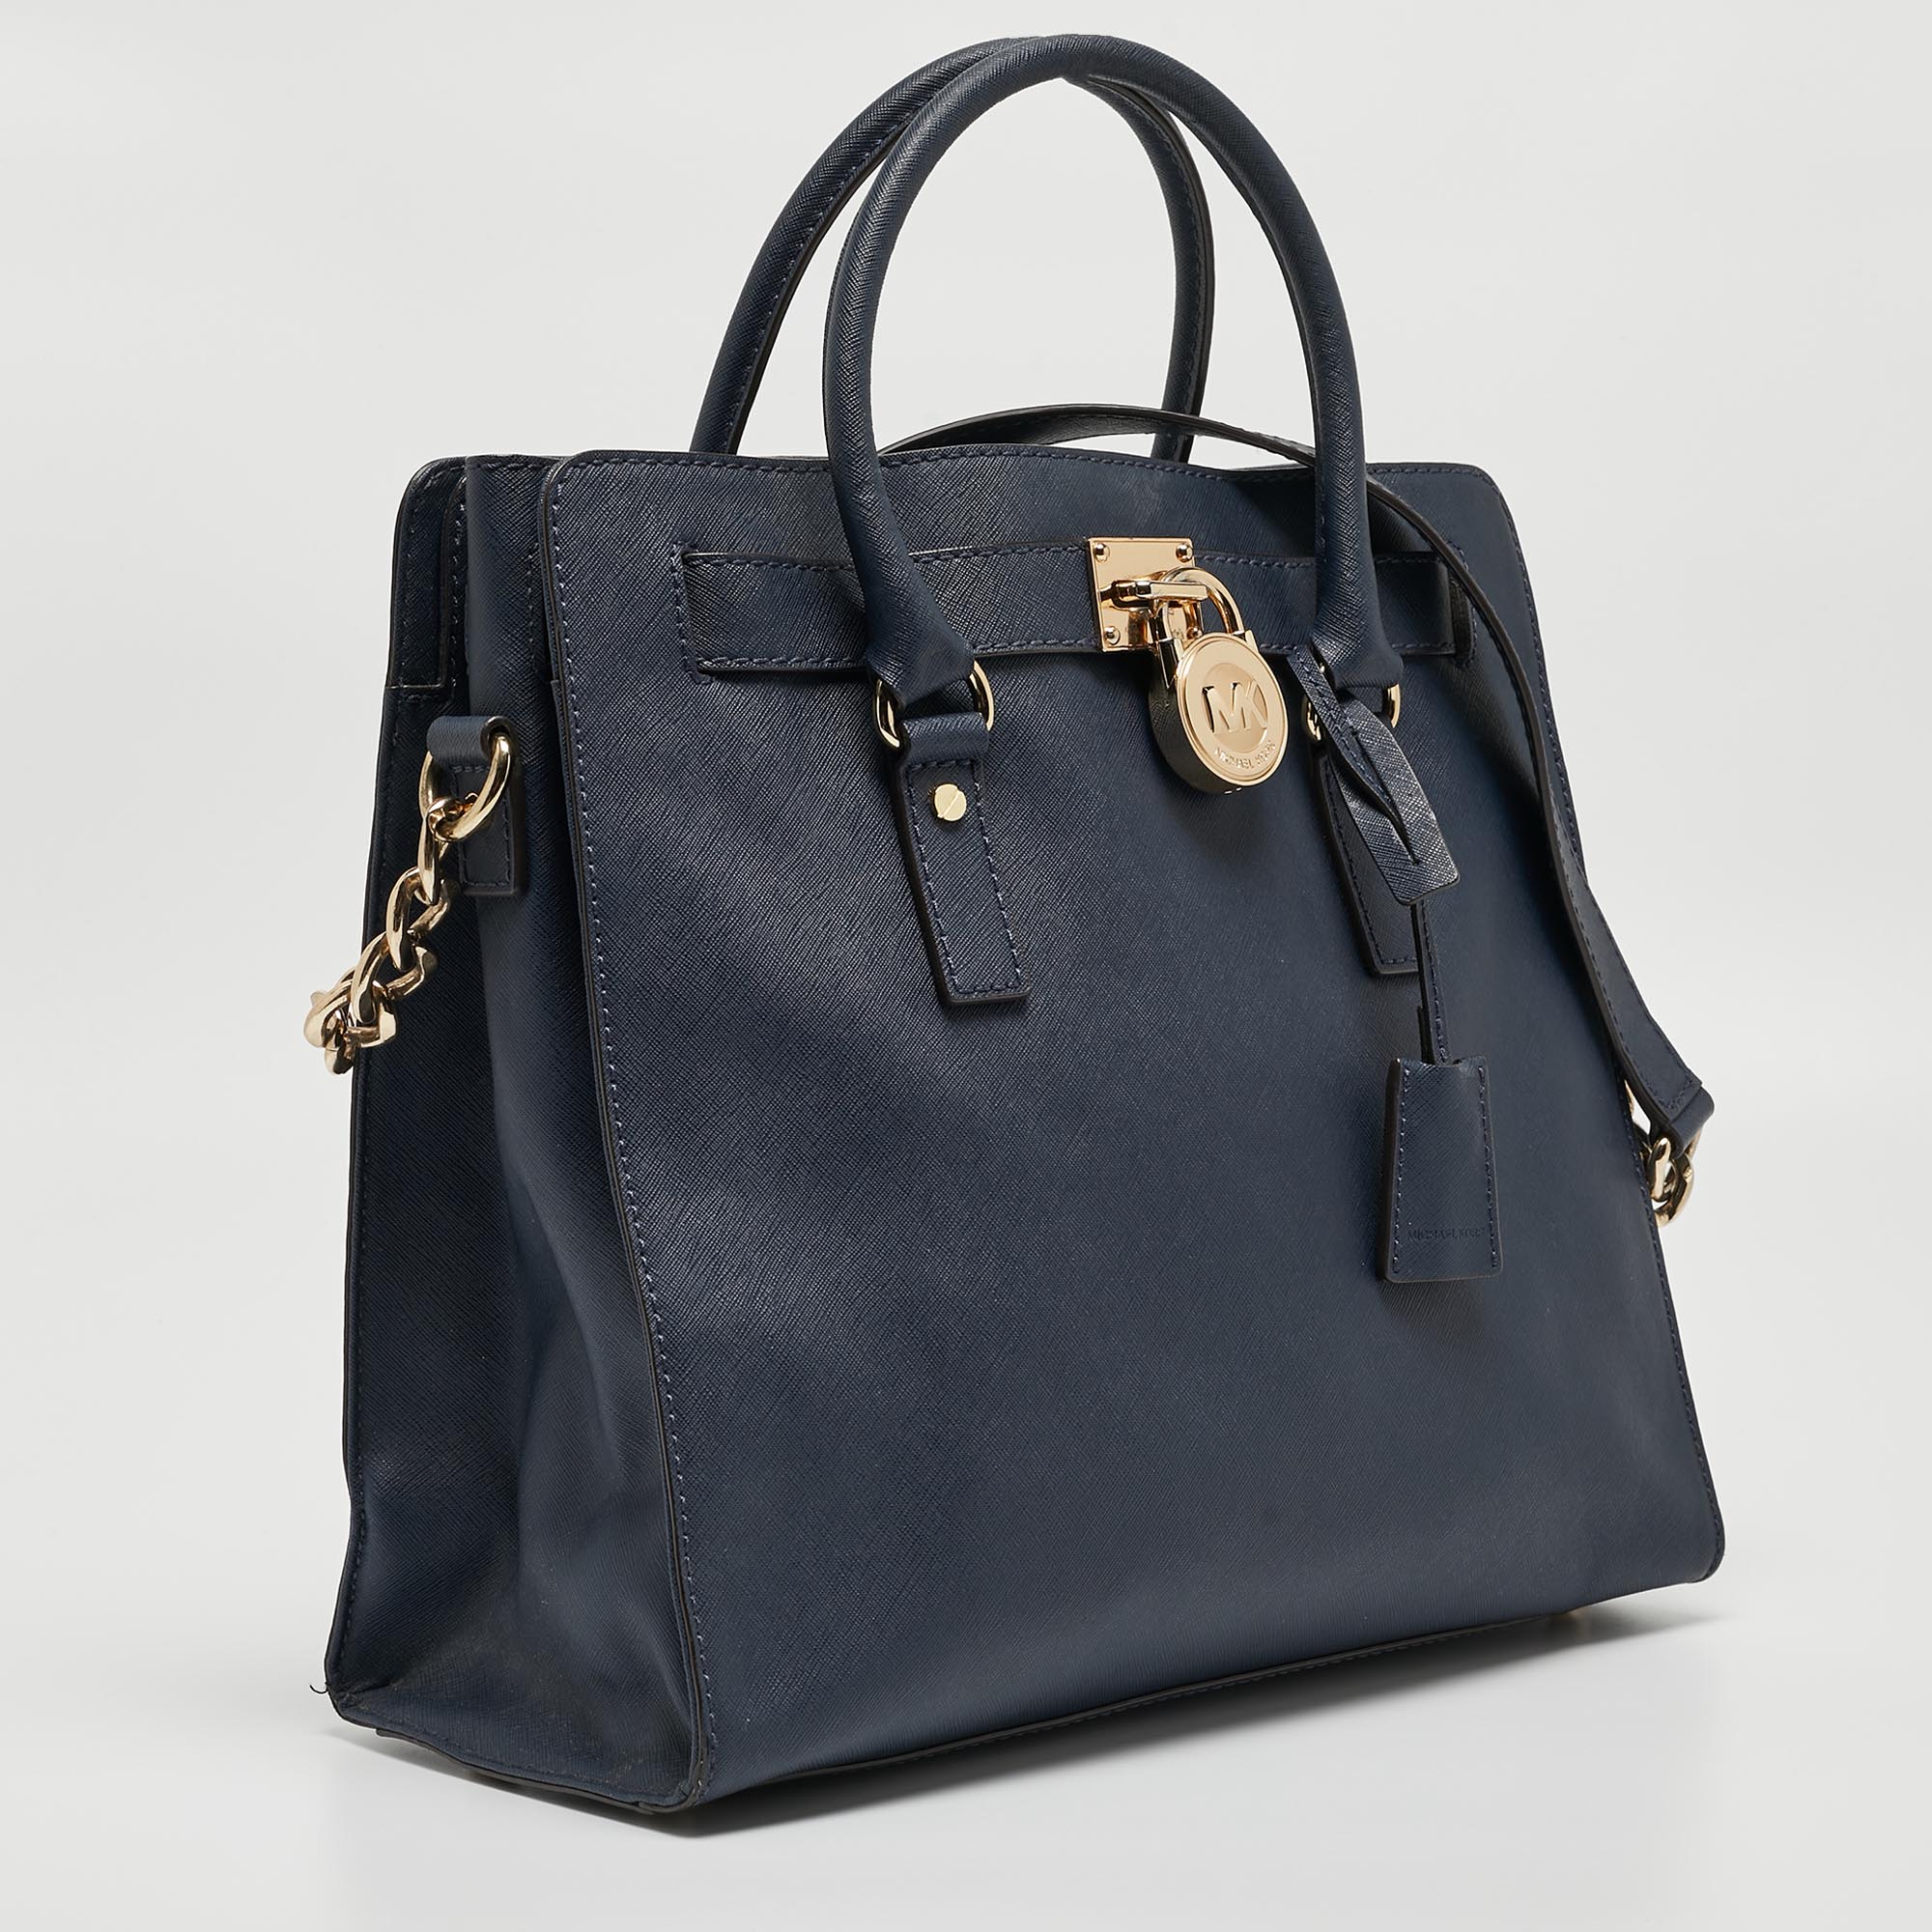 MICHAEL Michael Kors Navy Blue Leather Large Hamilton North South Tote